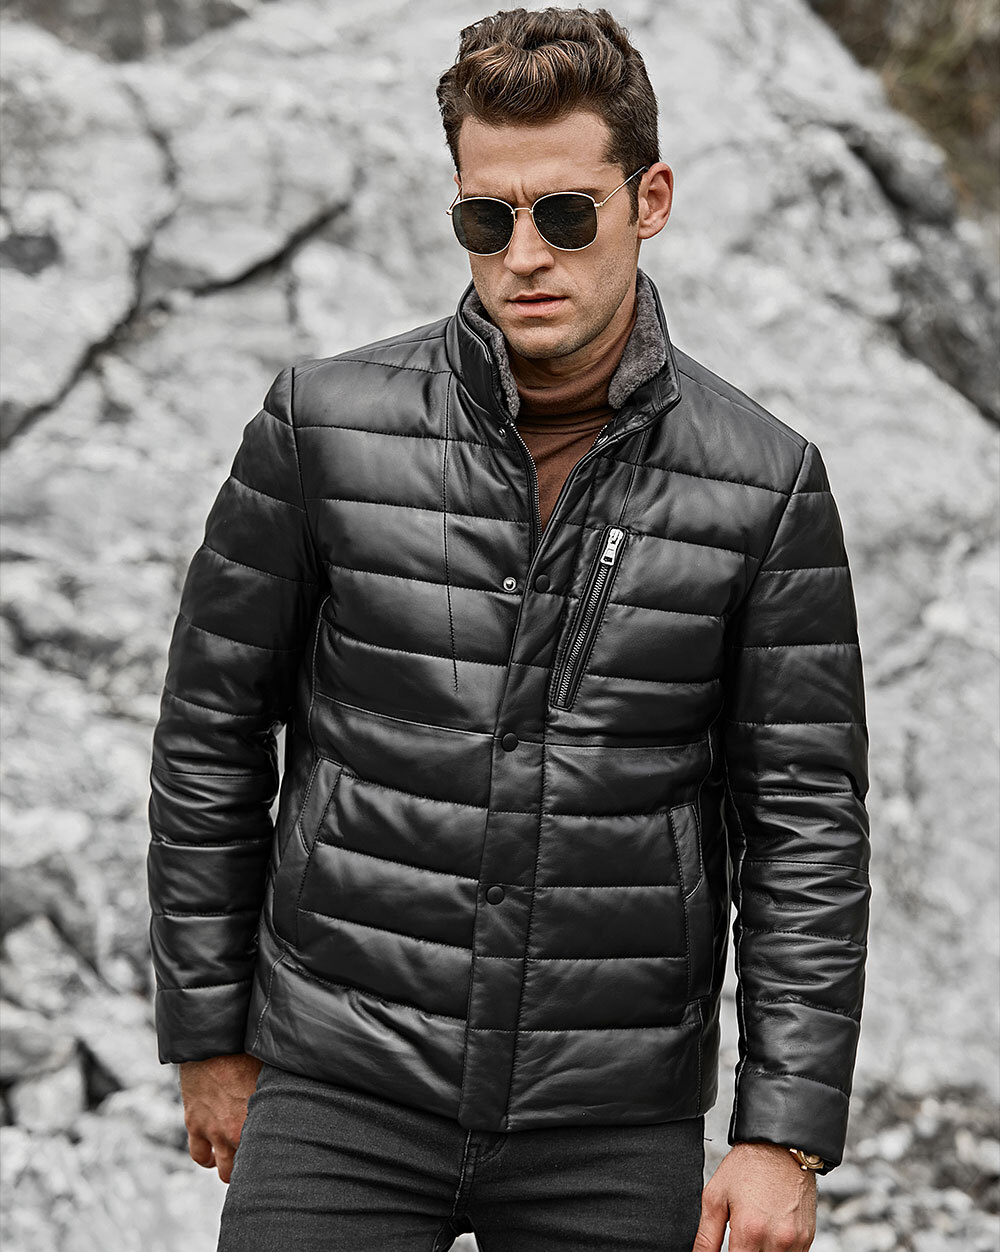 Men's Lambskin Leather Down Jacket Puffer Coat Removable Fur Collar 198 Fashion lambskin removable fur collar down jacket| 100% polyester lambskin removable fur collar down jacket